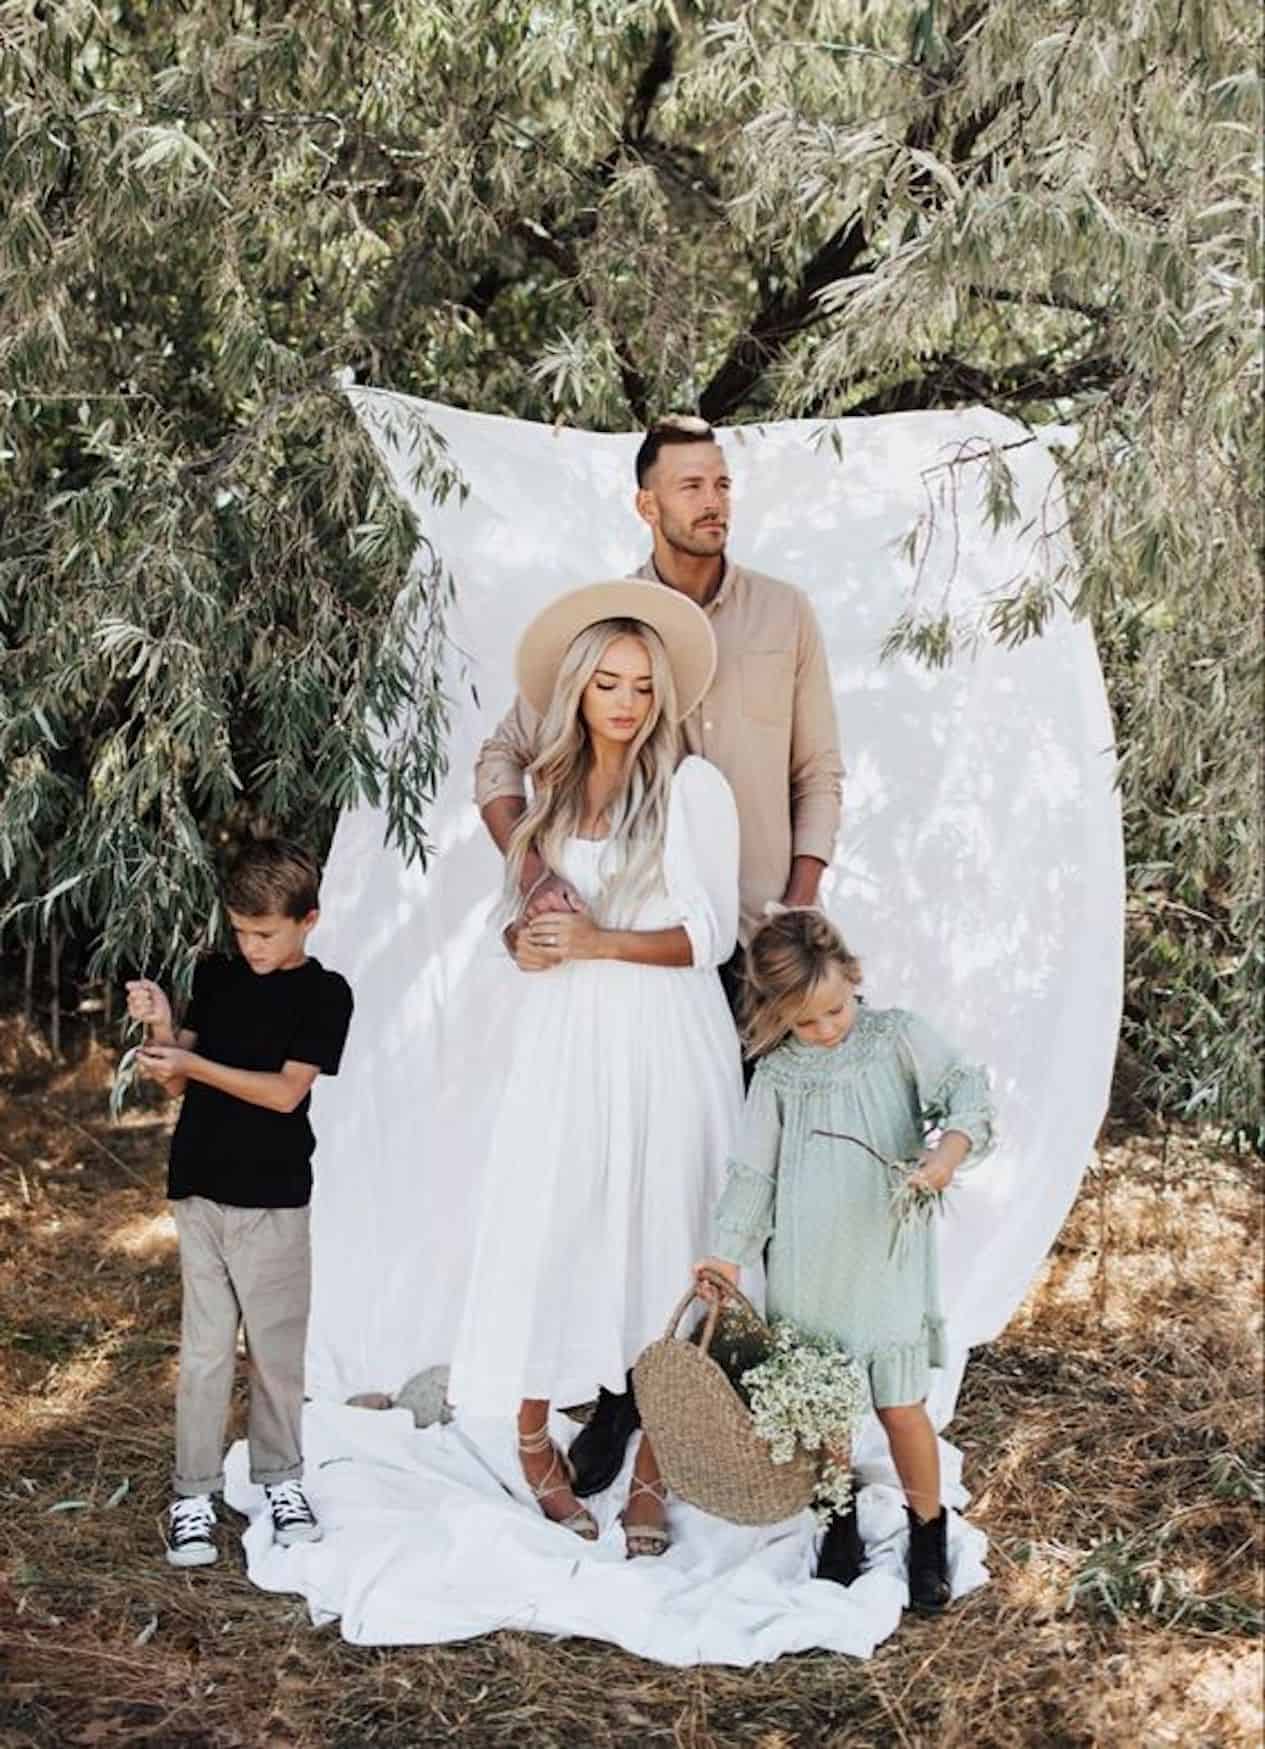 image of a family in a field with a tree in the background and a large white hanging sheet, wearing dressy clothing